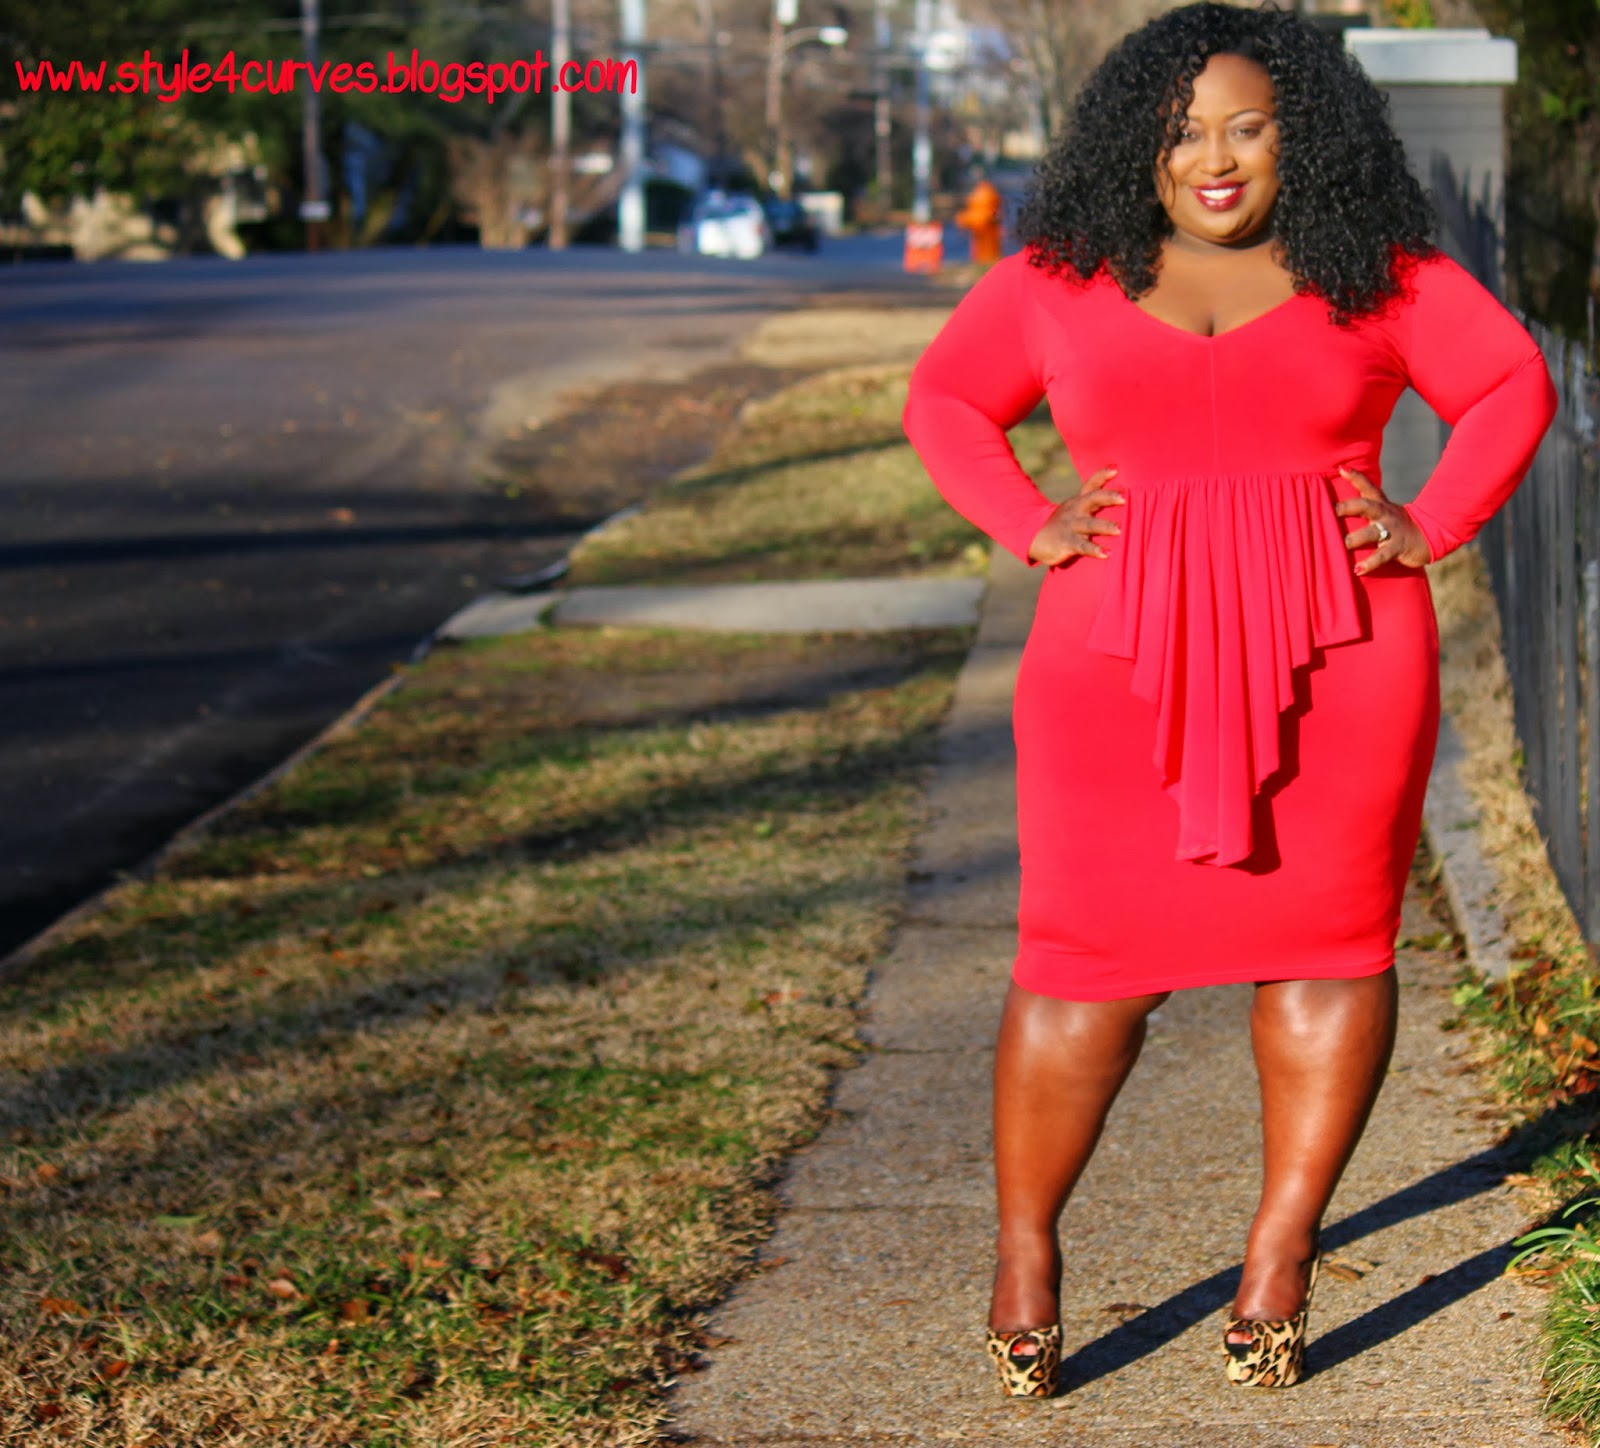 Style 4 Curves --For the Curvy Confident Woman: Curvy Devil In A Red Dress